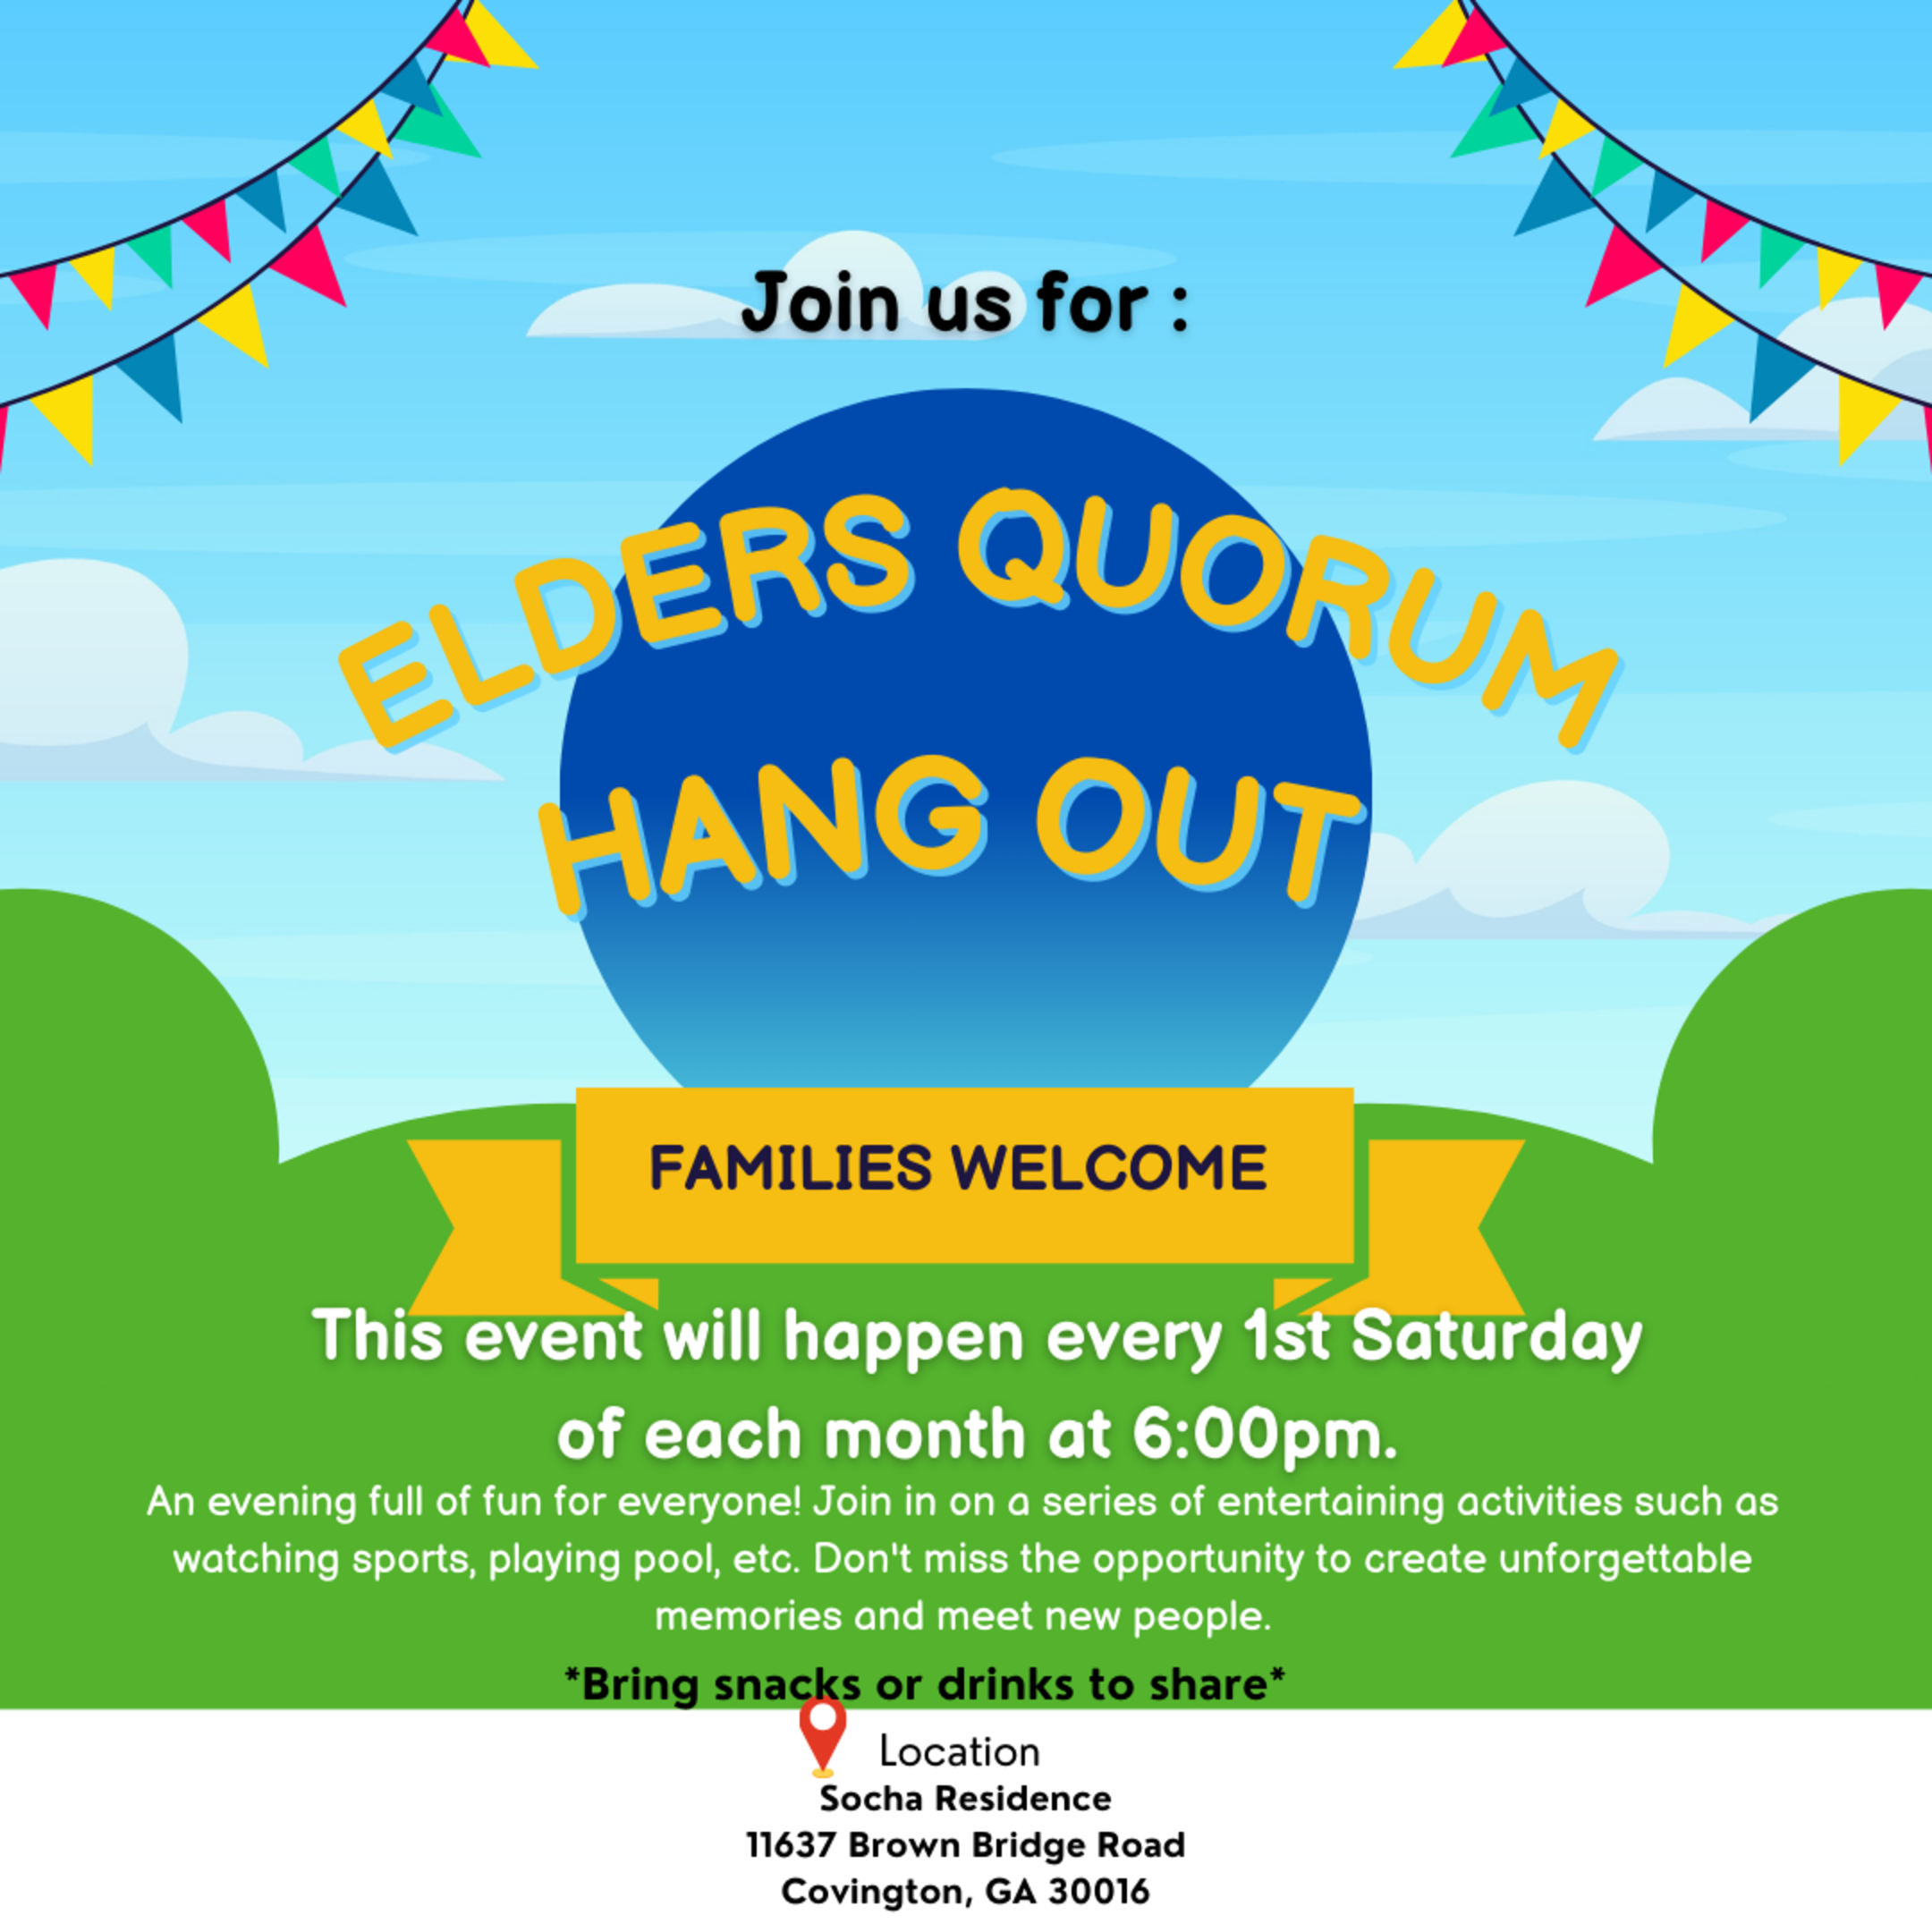 Come join me for Elders Quorum Hang Outon Jul 6, 2024by RSVP'ing at